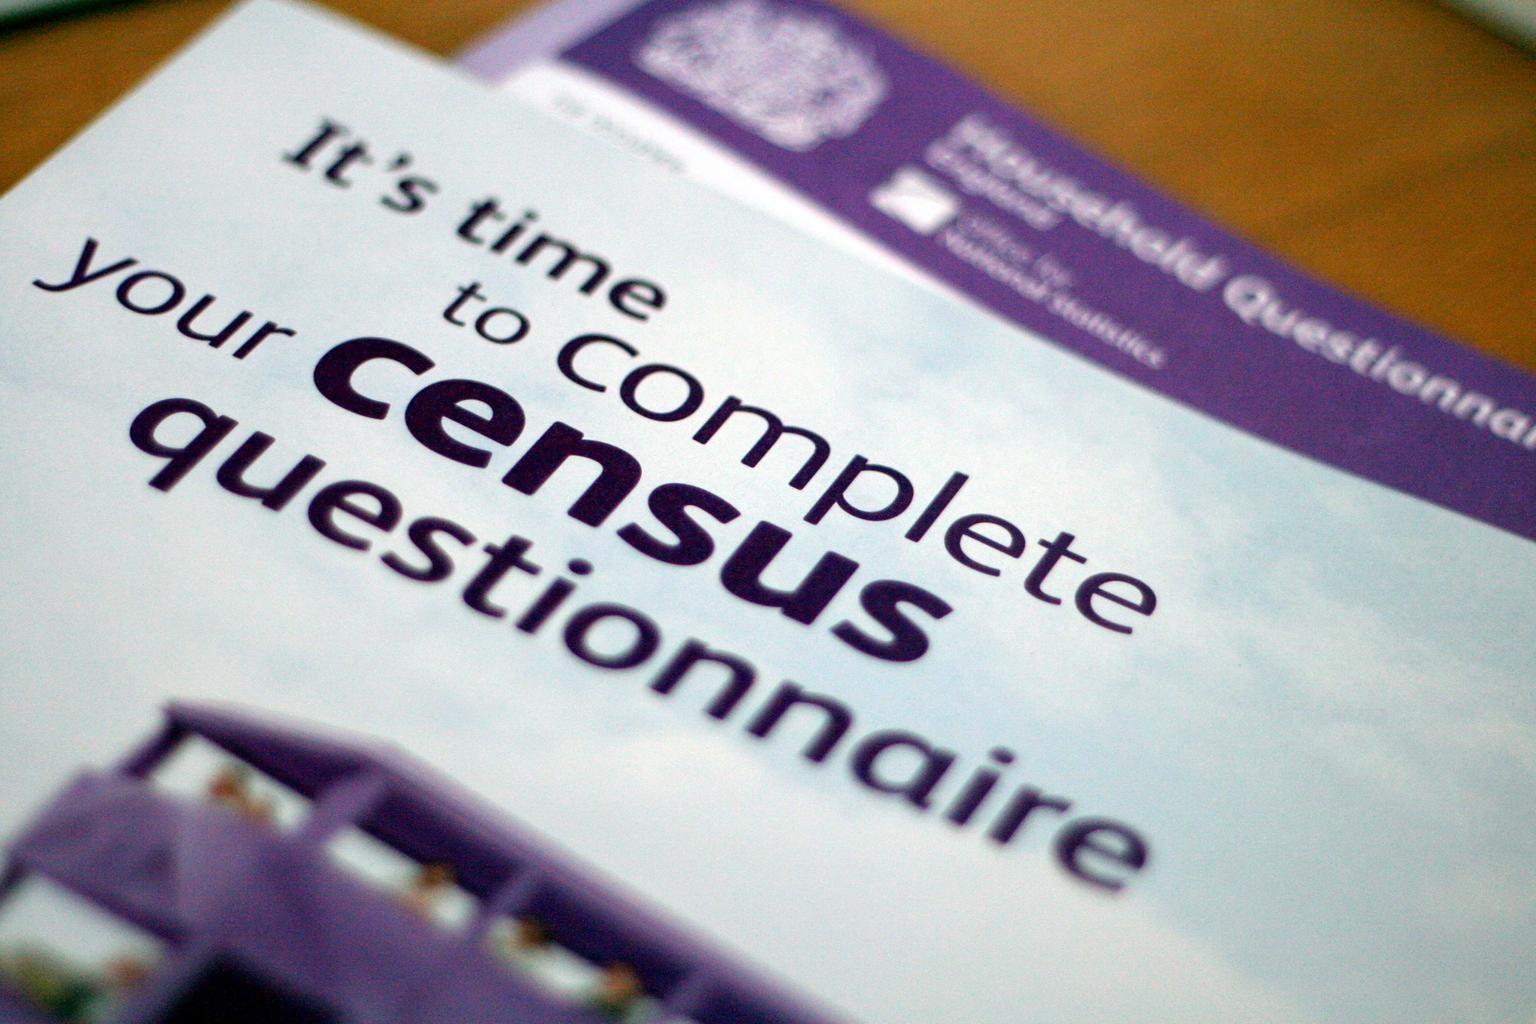 A picture of the US Census questionnaire cover.